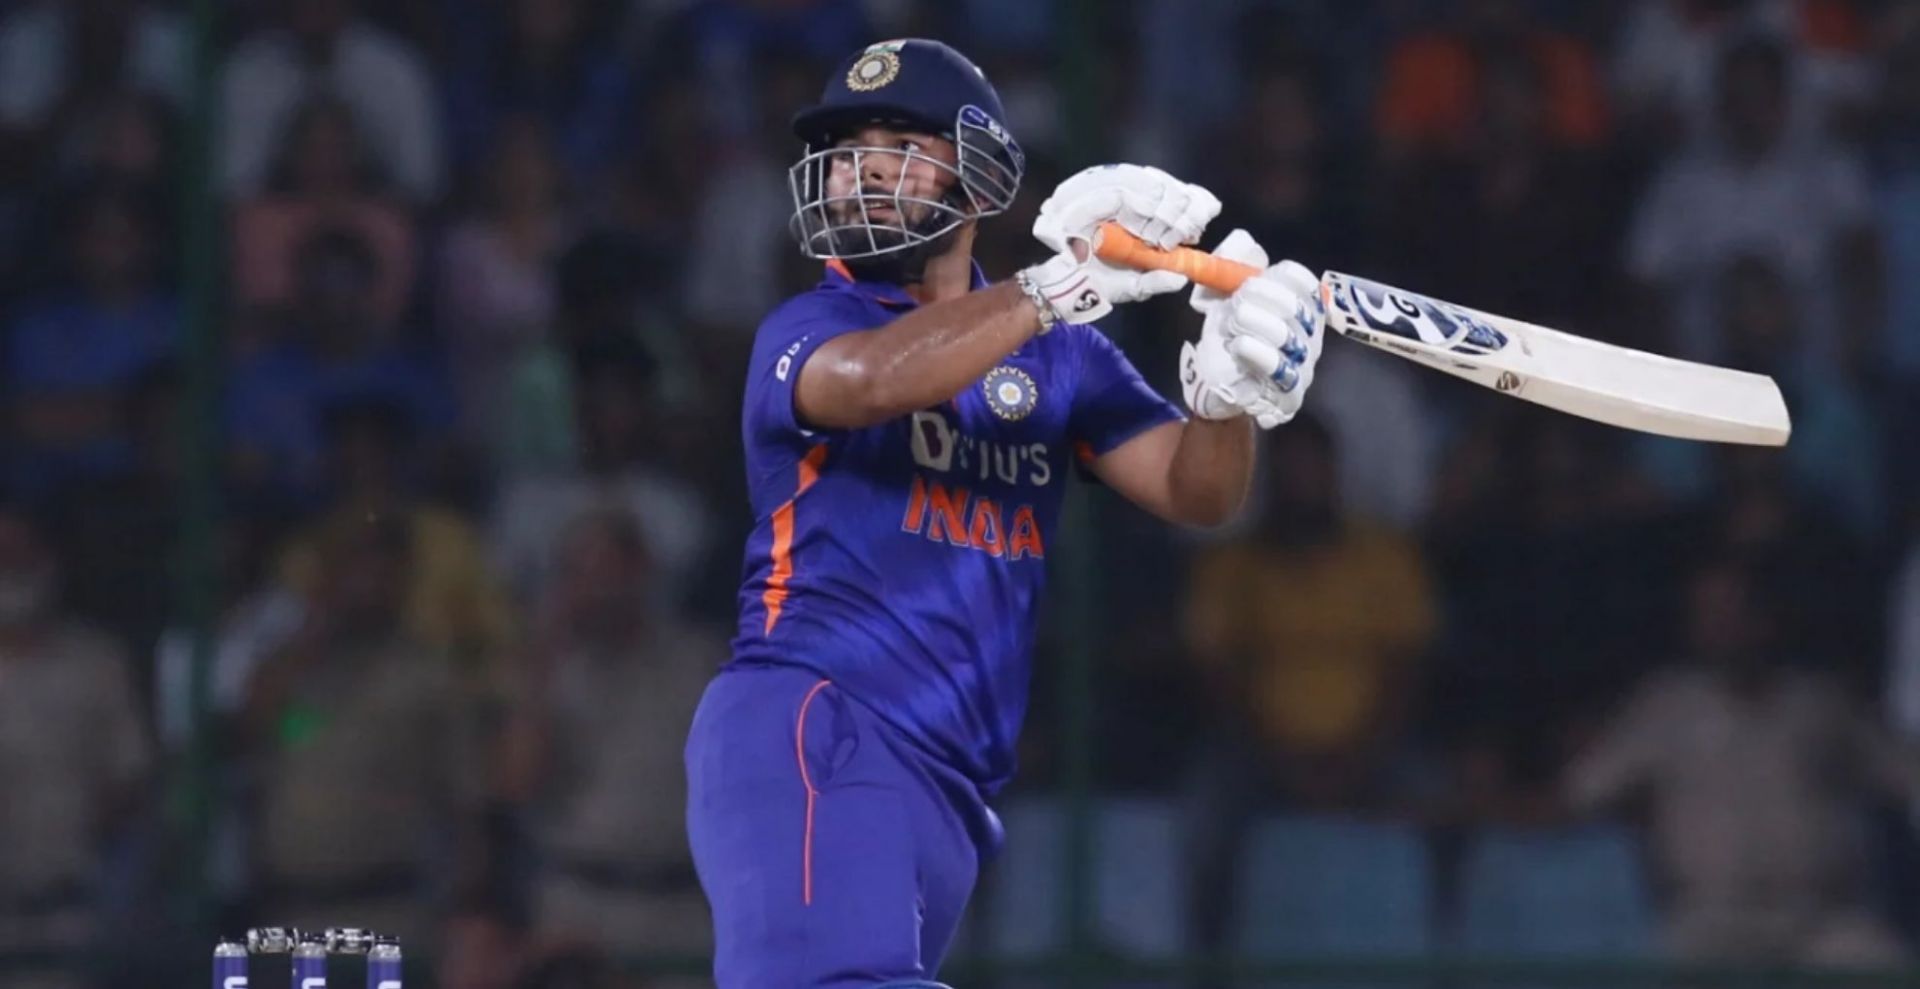 Rishabh Pant will look to put some runs under his belt in the T20Is against England. (Credit: BCCI)